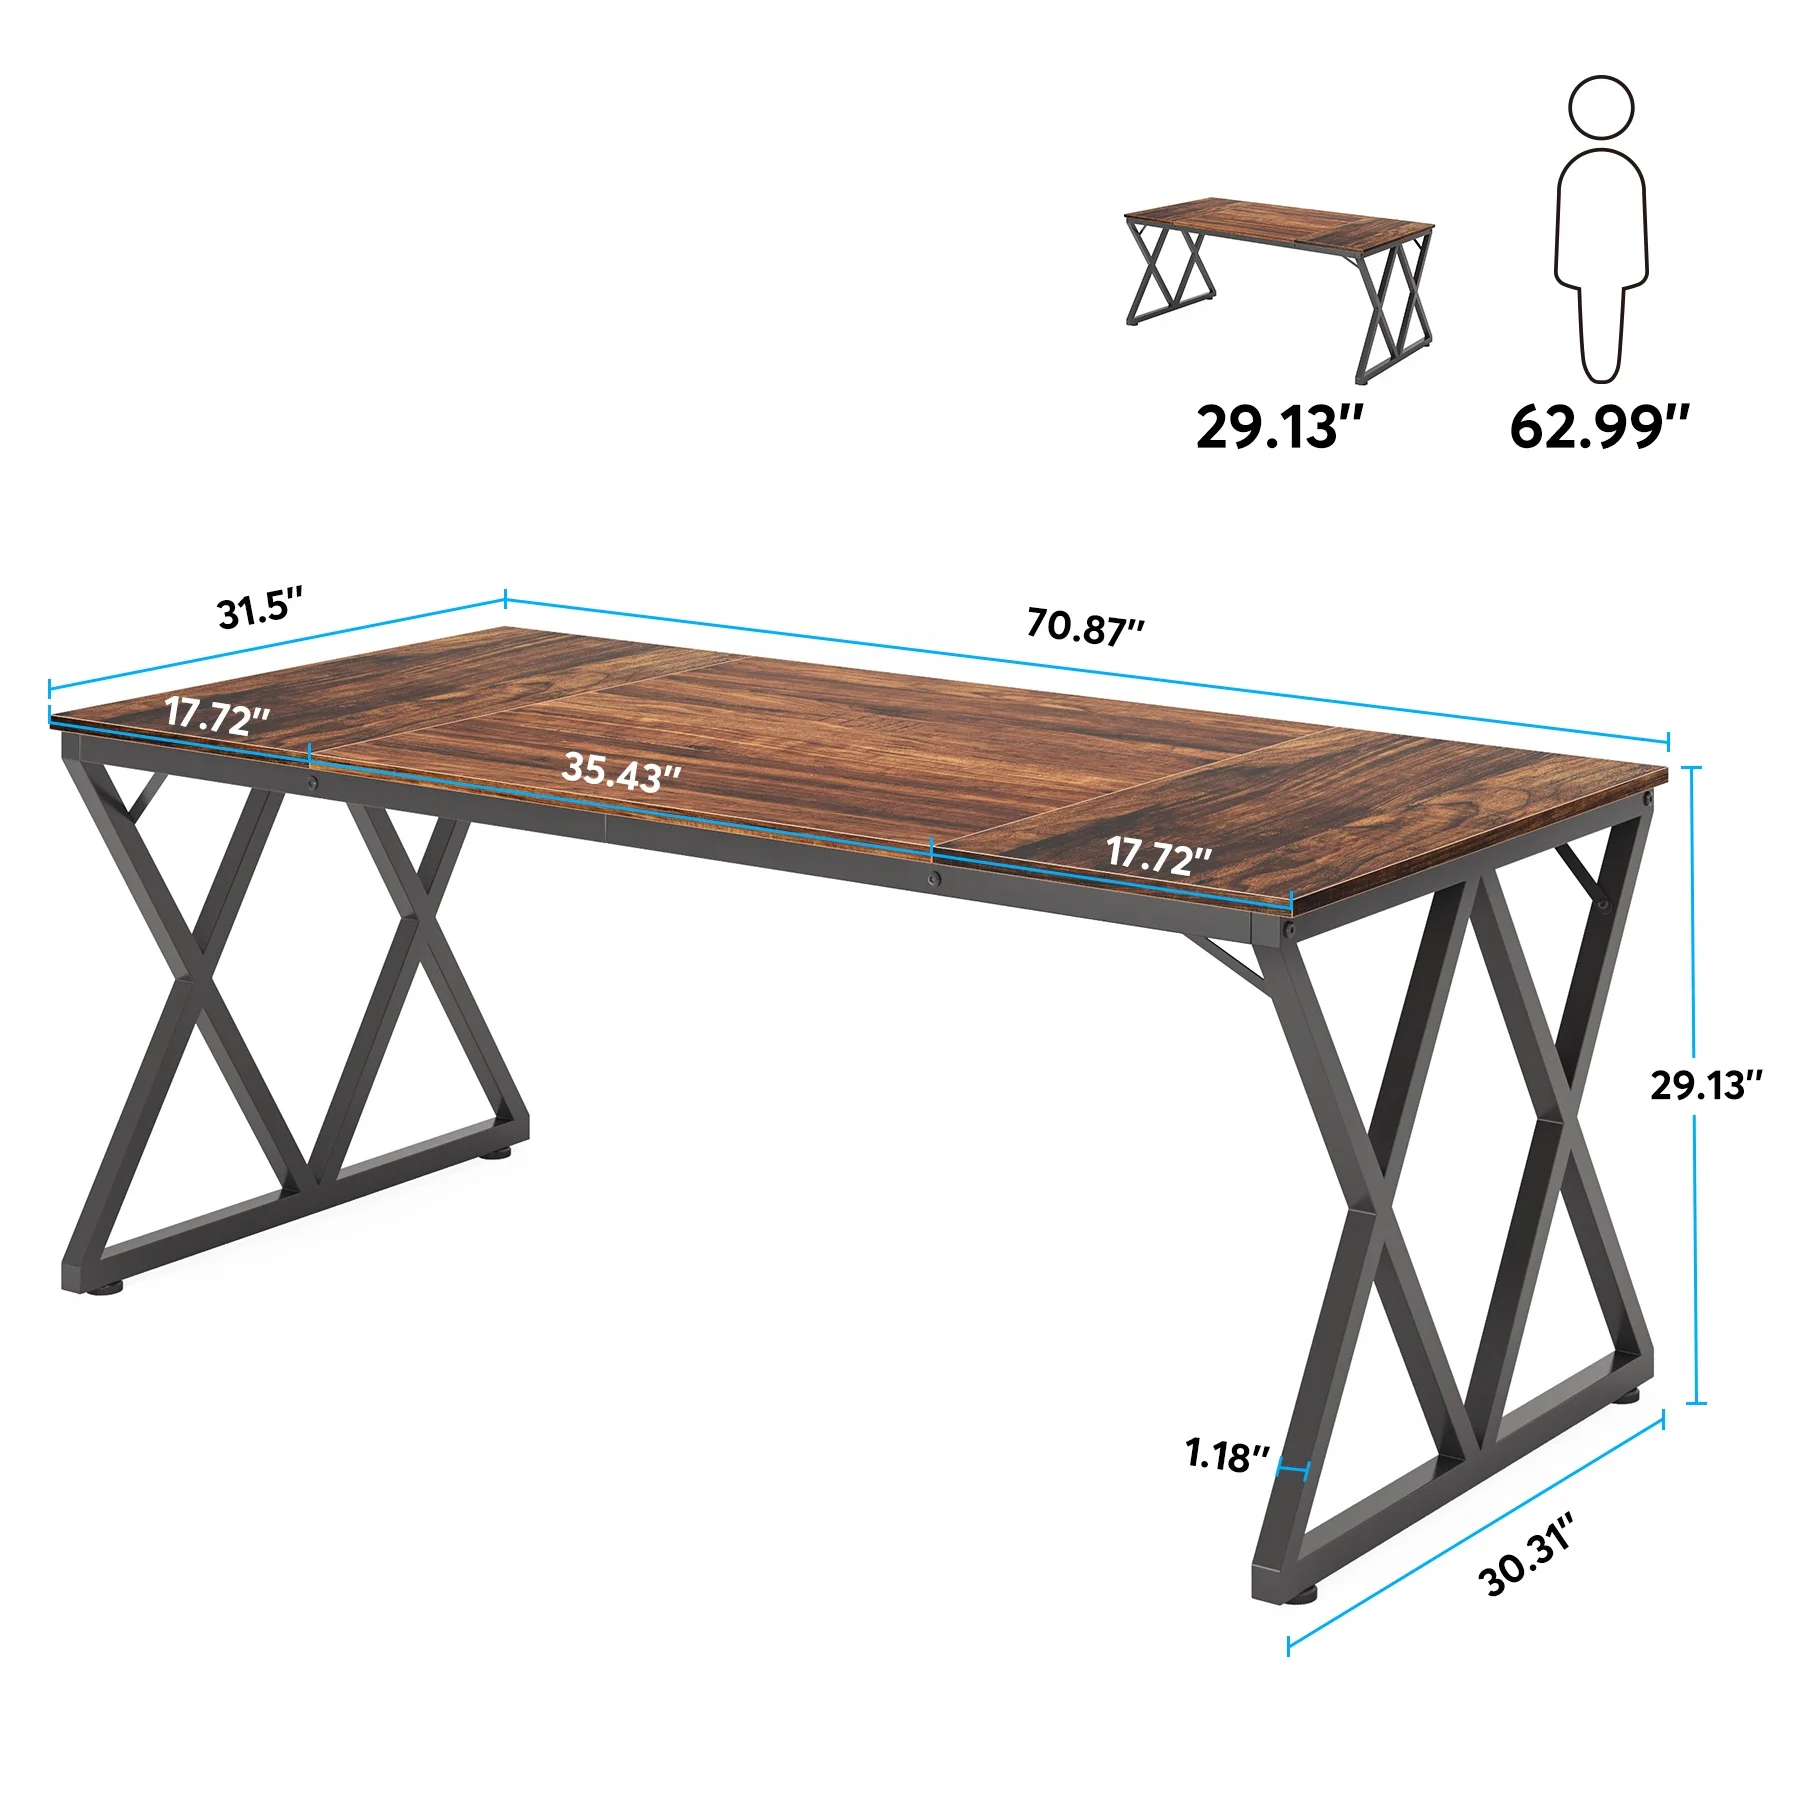 Tribesigns 70.87 Inch Wooden Rectangle restaurant furniture office meeting table dining table for 6 people